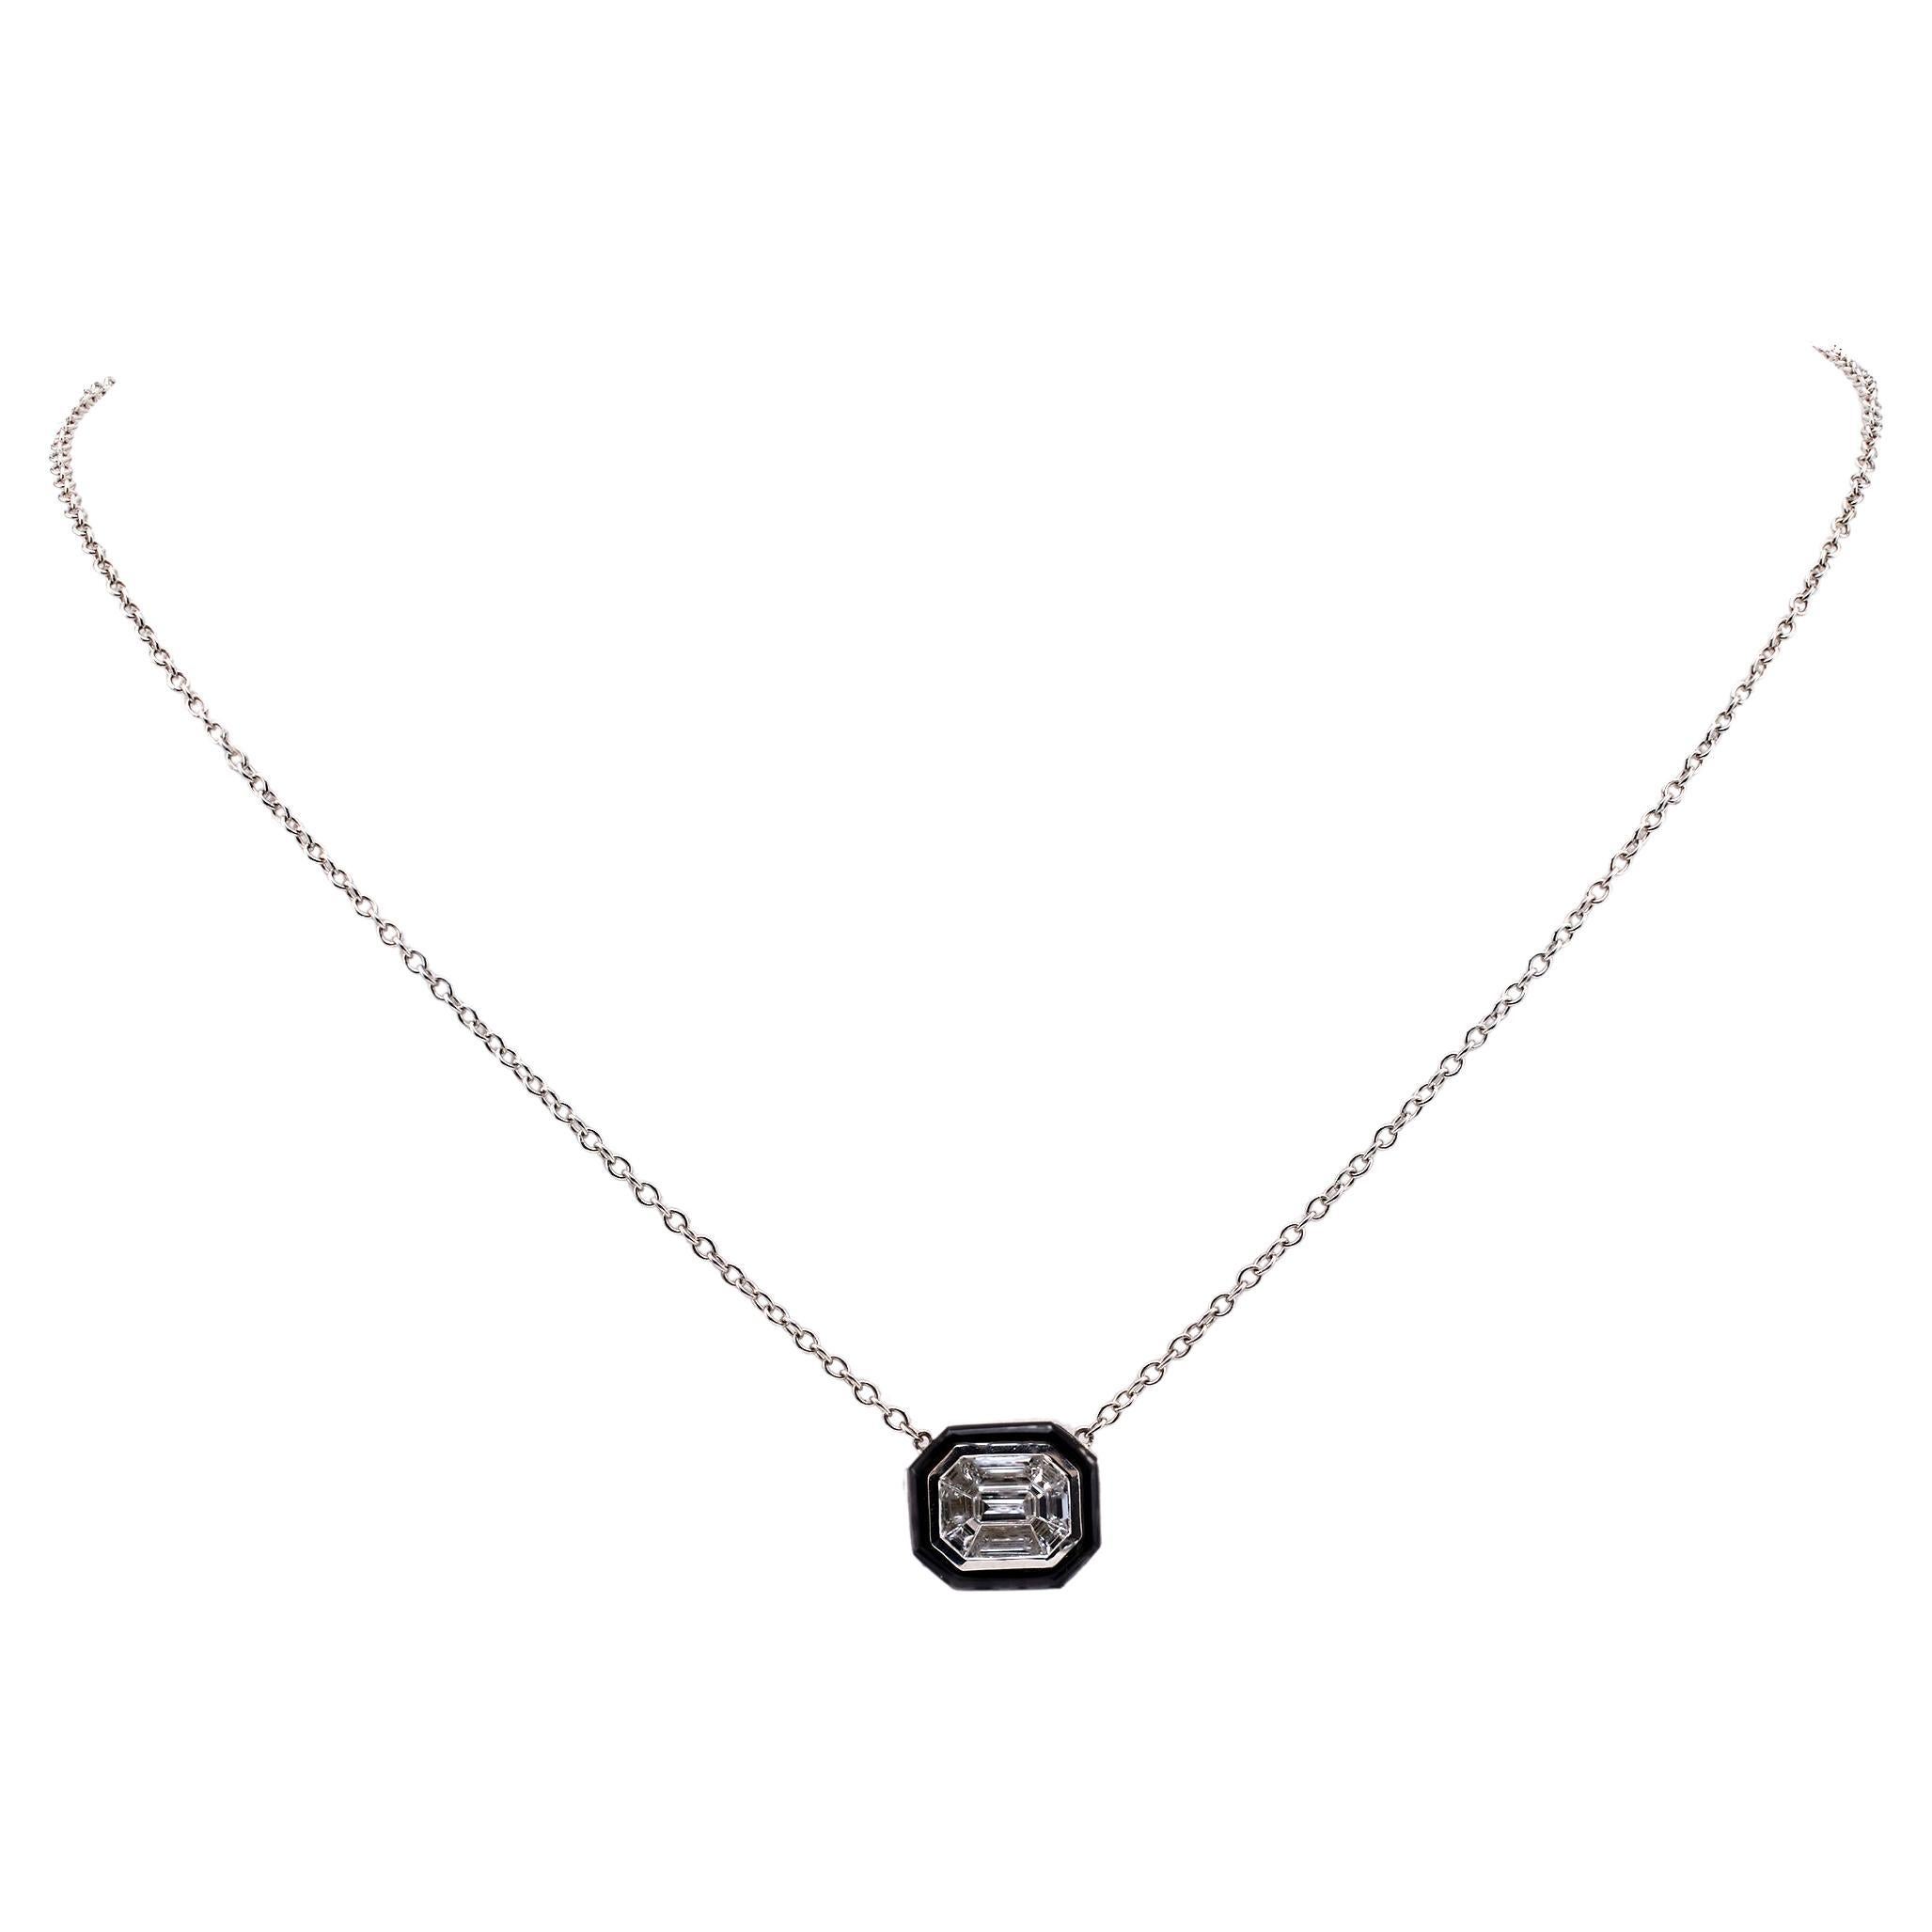 0.63 Carat Total Weight Diamond Onyx 18k White Gold Pendant Necklace For Sale